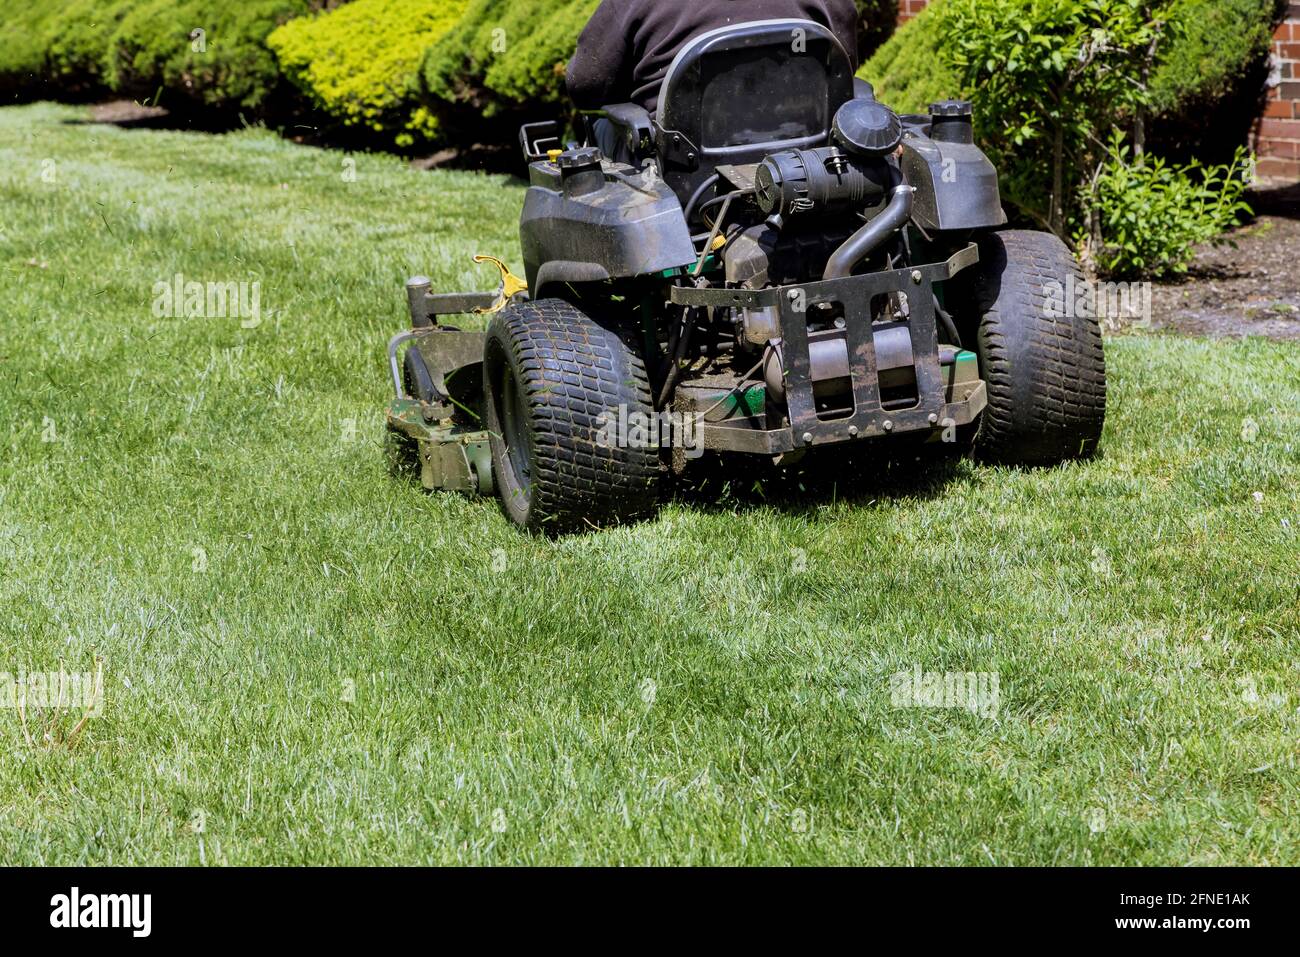 Machine for cutting lawns on lawn mower on green grass in garden. Stock Photo